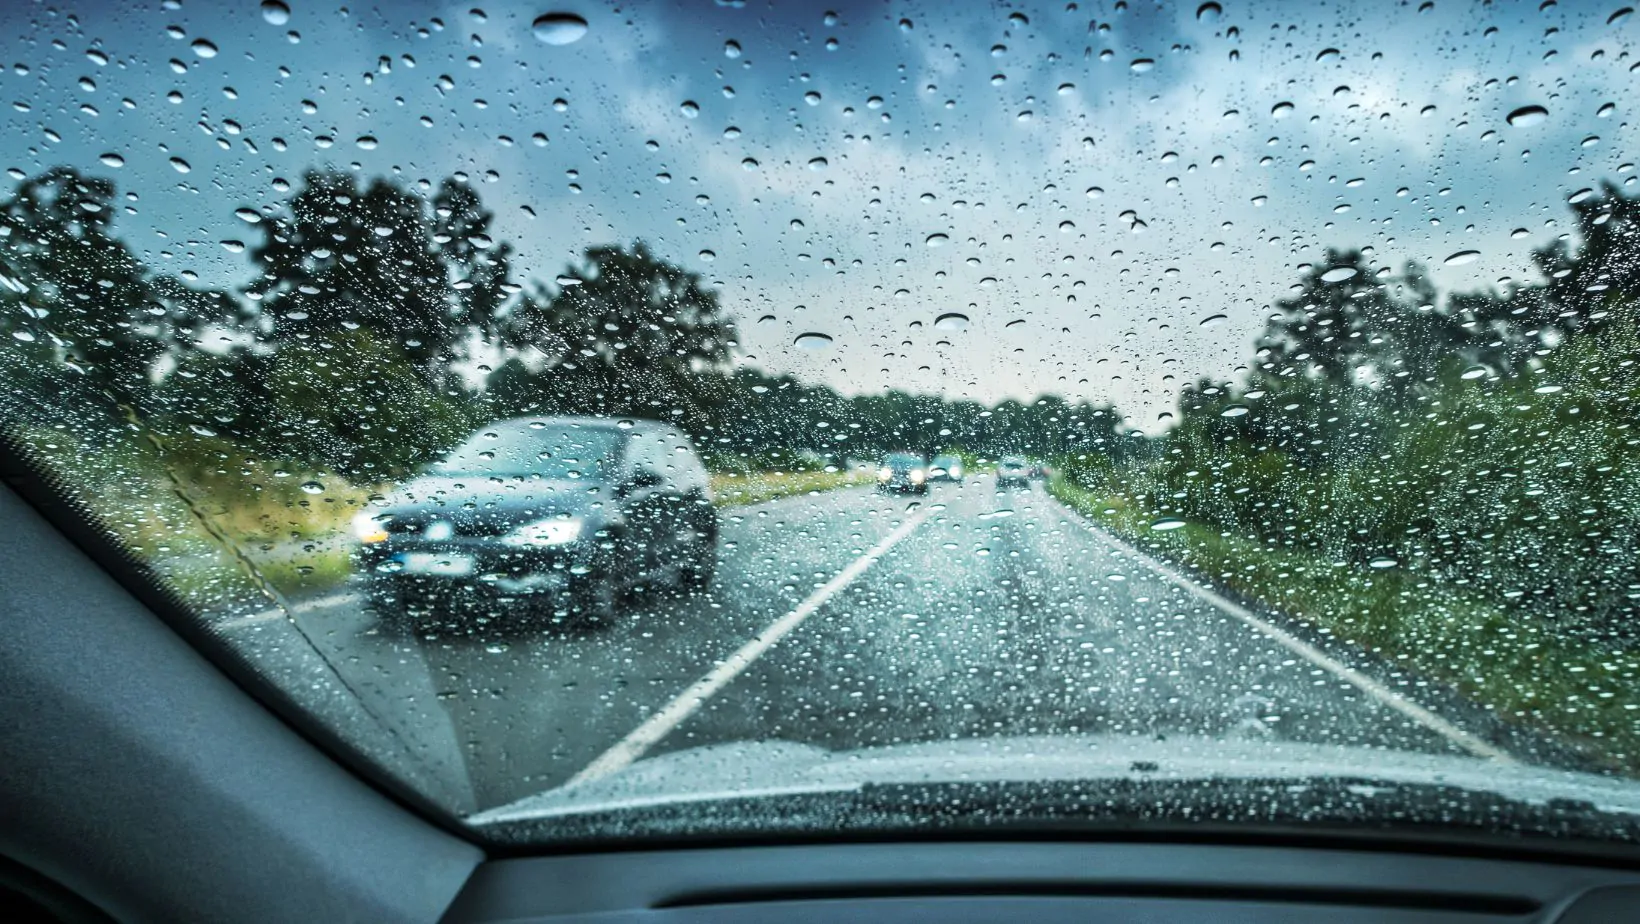 TyreSafe urges drivers to increase safety vigilance amidst Met Office yellow weather warnings